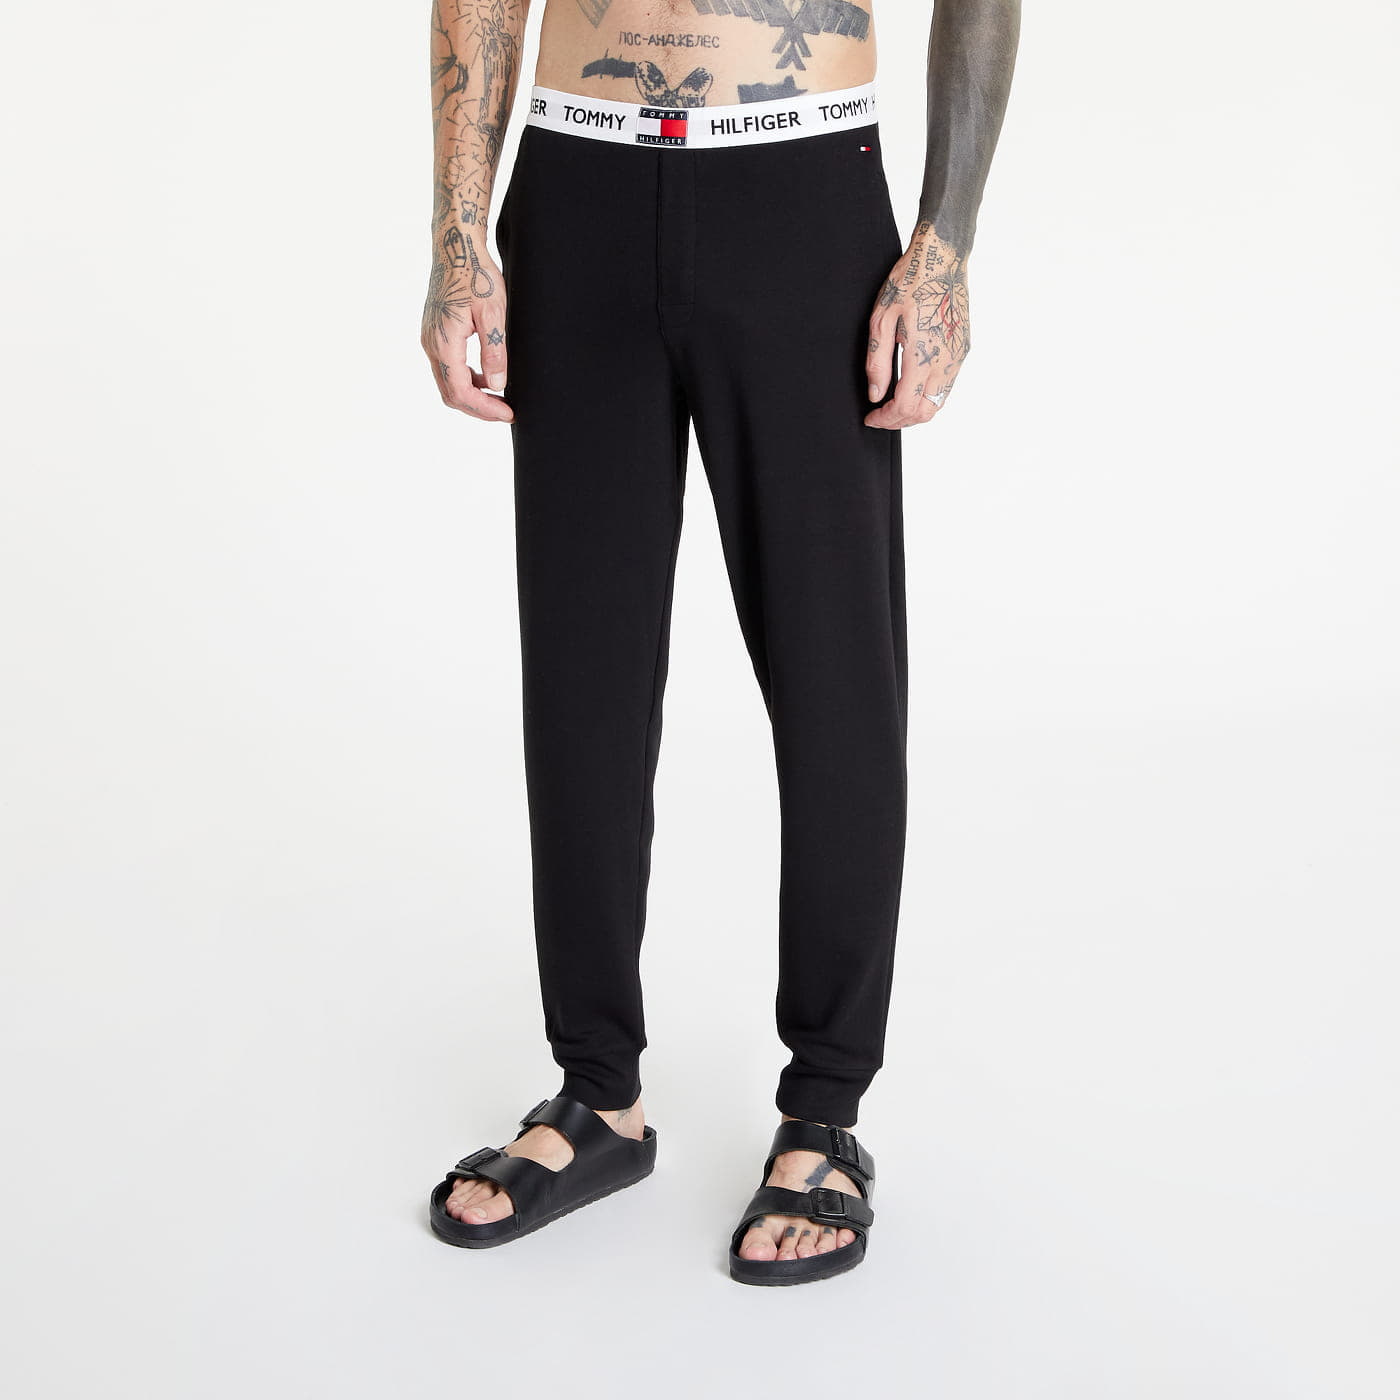 Pyjamas Tommy Hilfiger Tommy 85 Relaxed Fit Lounge Bottoms Black